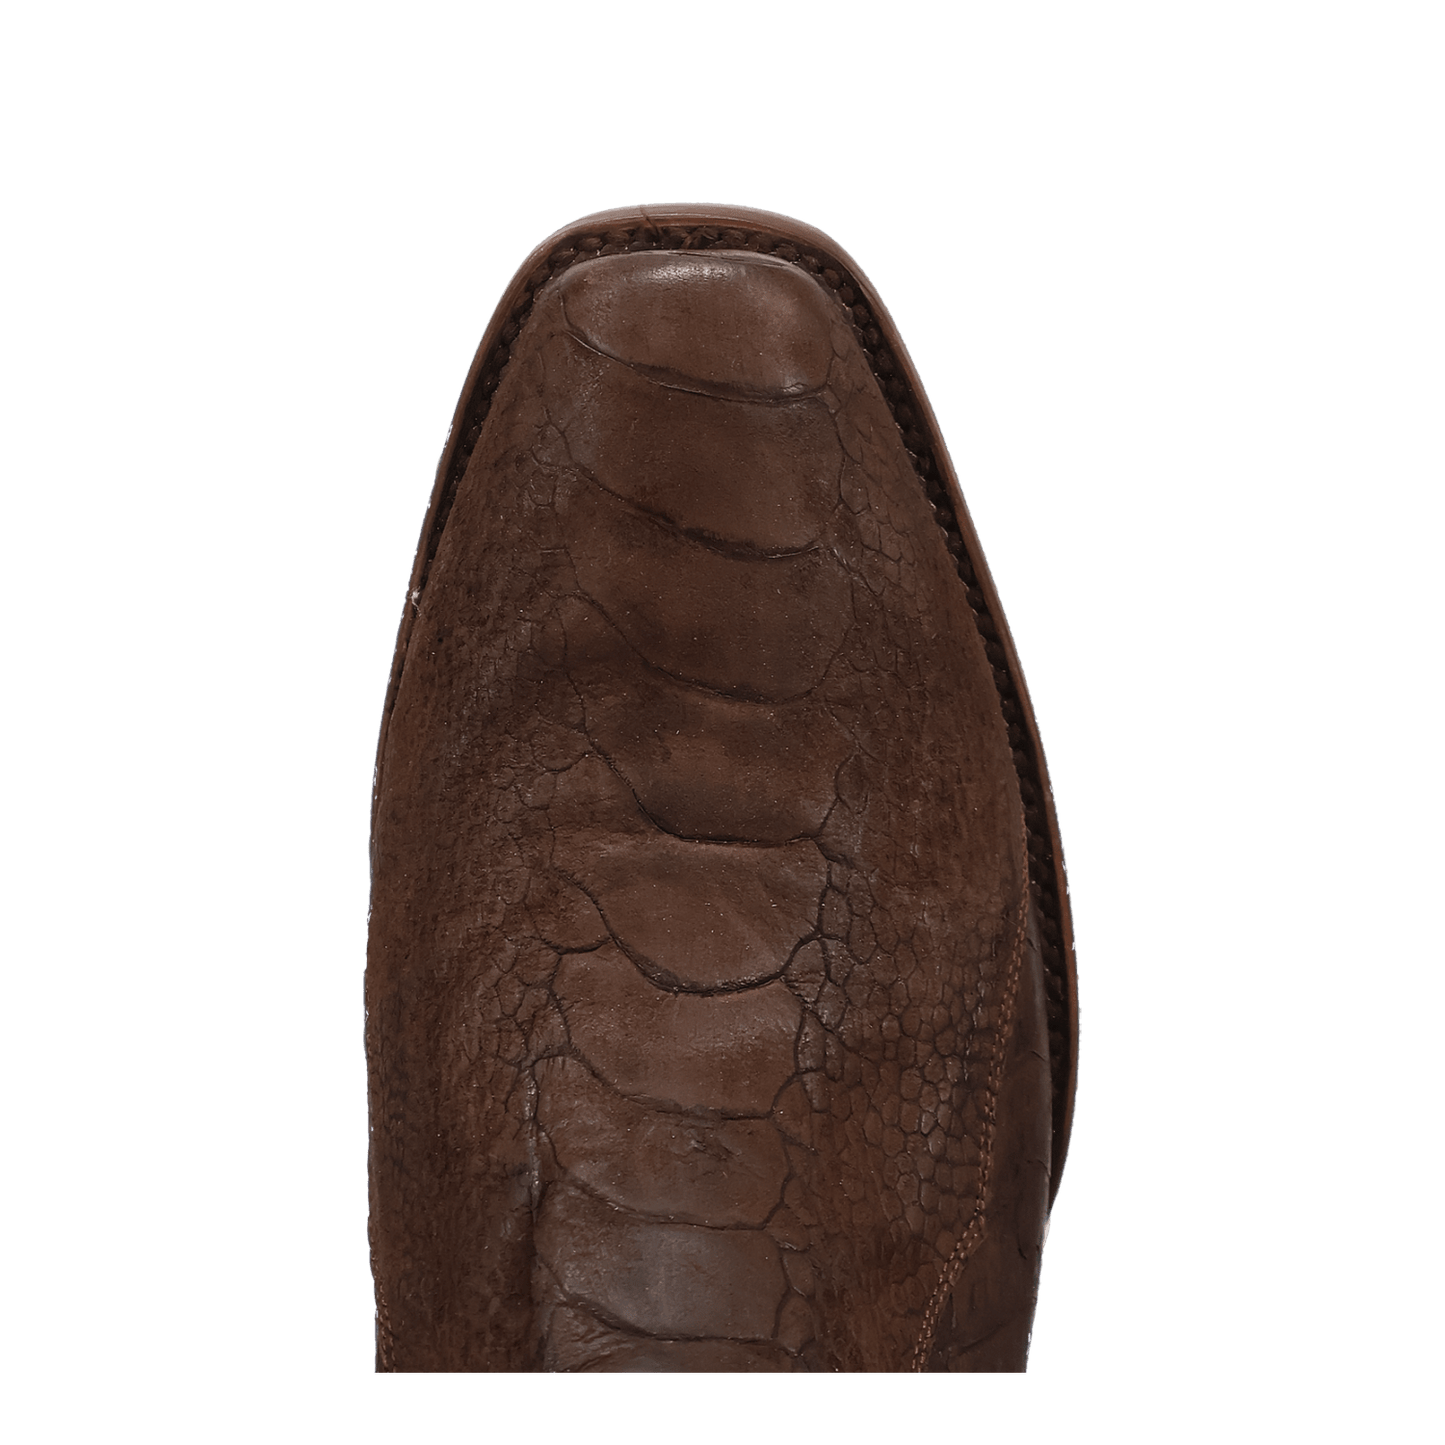 Anders Ostrich Leg Western Boot